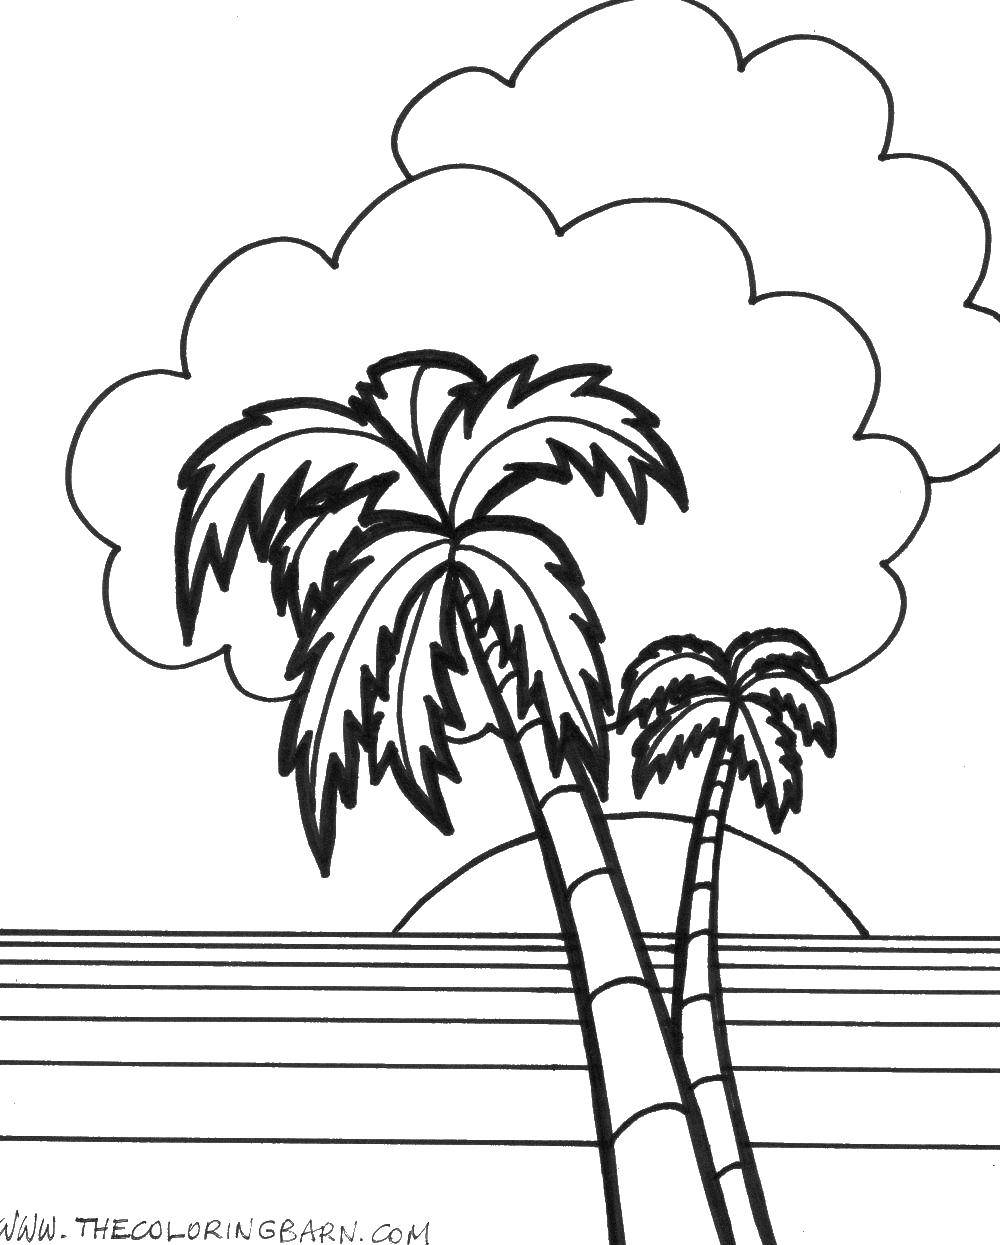 Coloring Sunset, palm trees. Category coloring. Tags:  Sun, rays, joy.